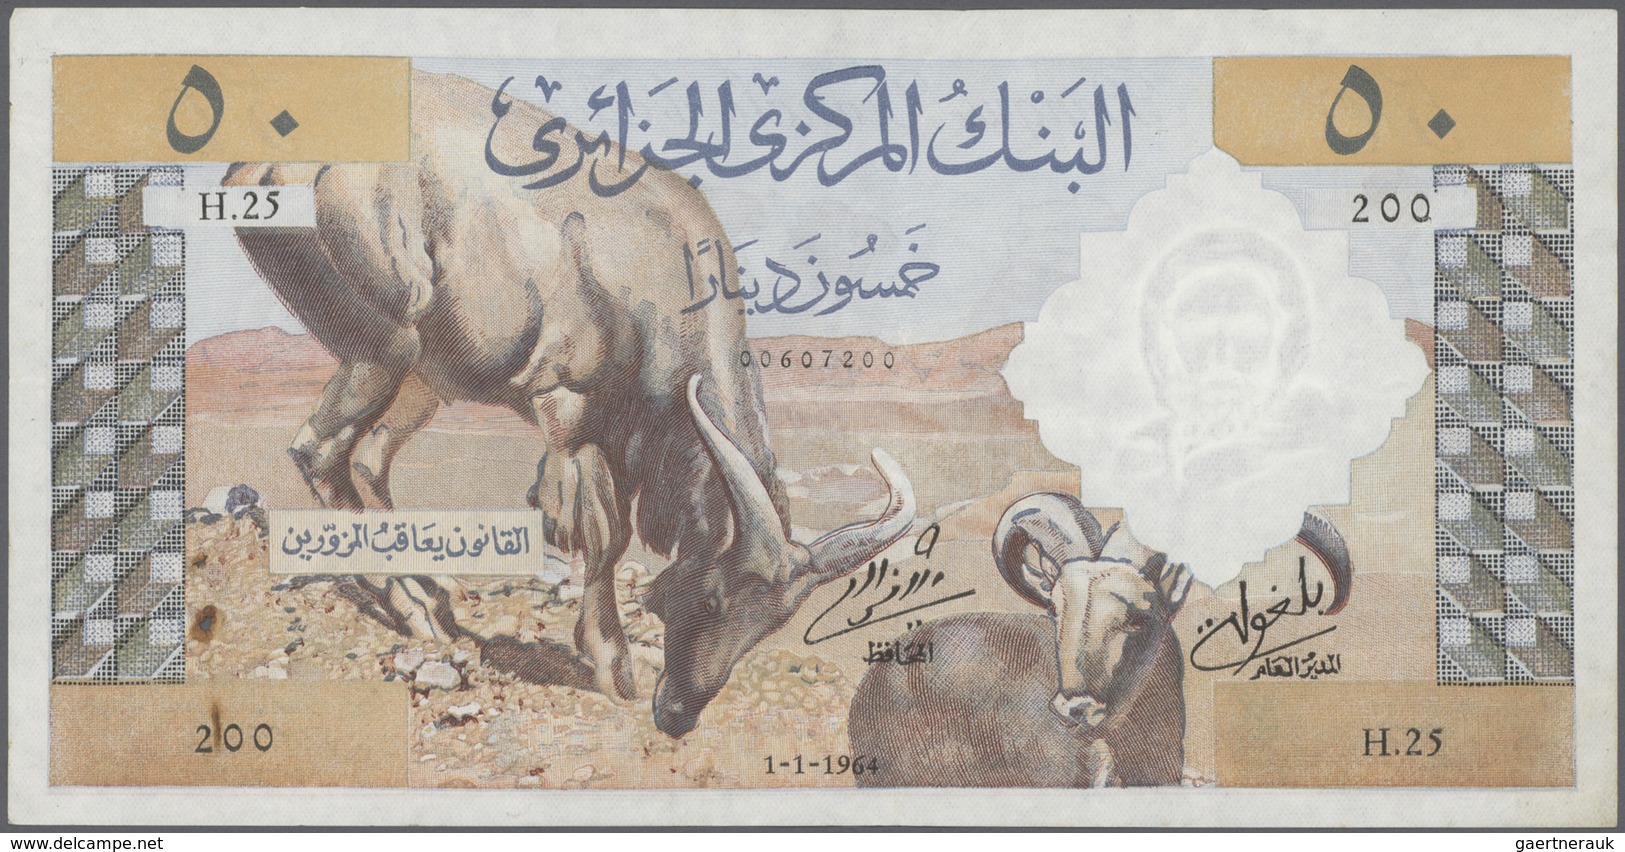 Algeria / Algerien: Set Of 2 Notes 50 Dinars 1964 P. 124, Both In Lightly Used Condition, Not Washed - Argelia